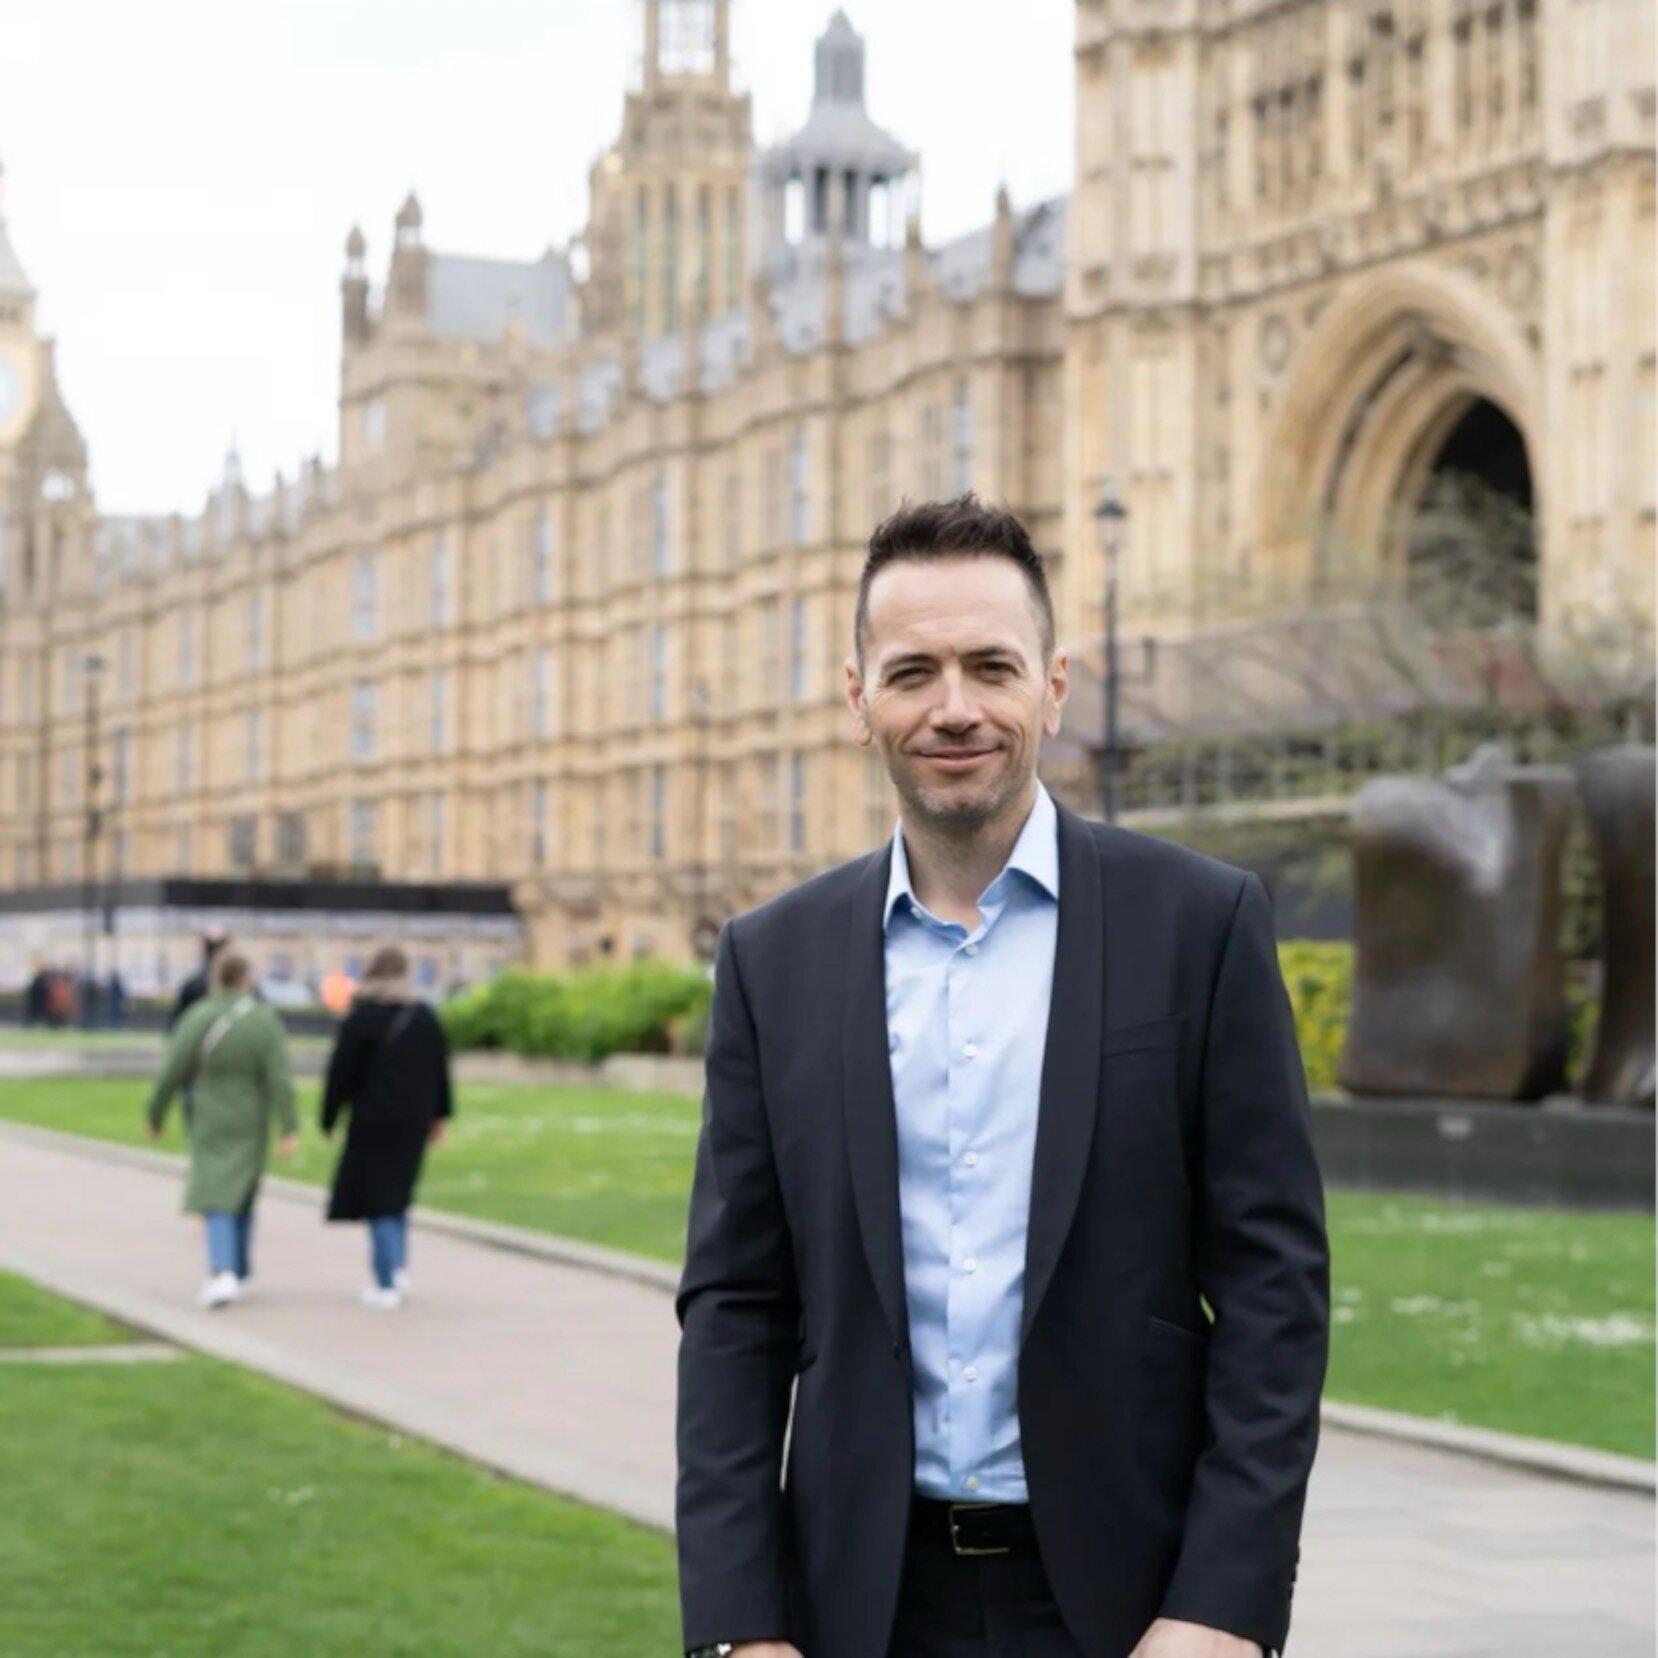 What a fantastic initiative led by our ambassador @nickdougherty5 and @golf_foundation_org.

Last week, Nick went along to Westminster to showcase the #unleashyourdrive programme which uses nine mental toughness tools to help young people prepare for